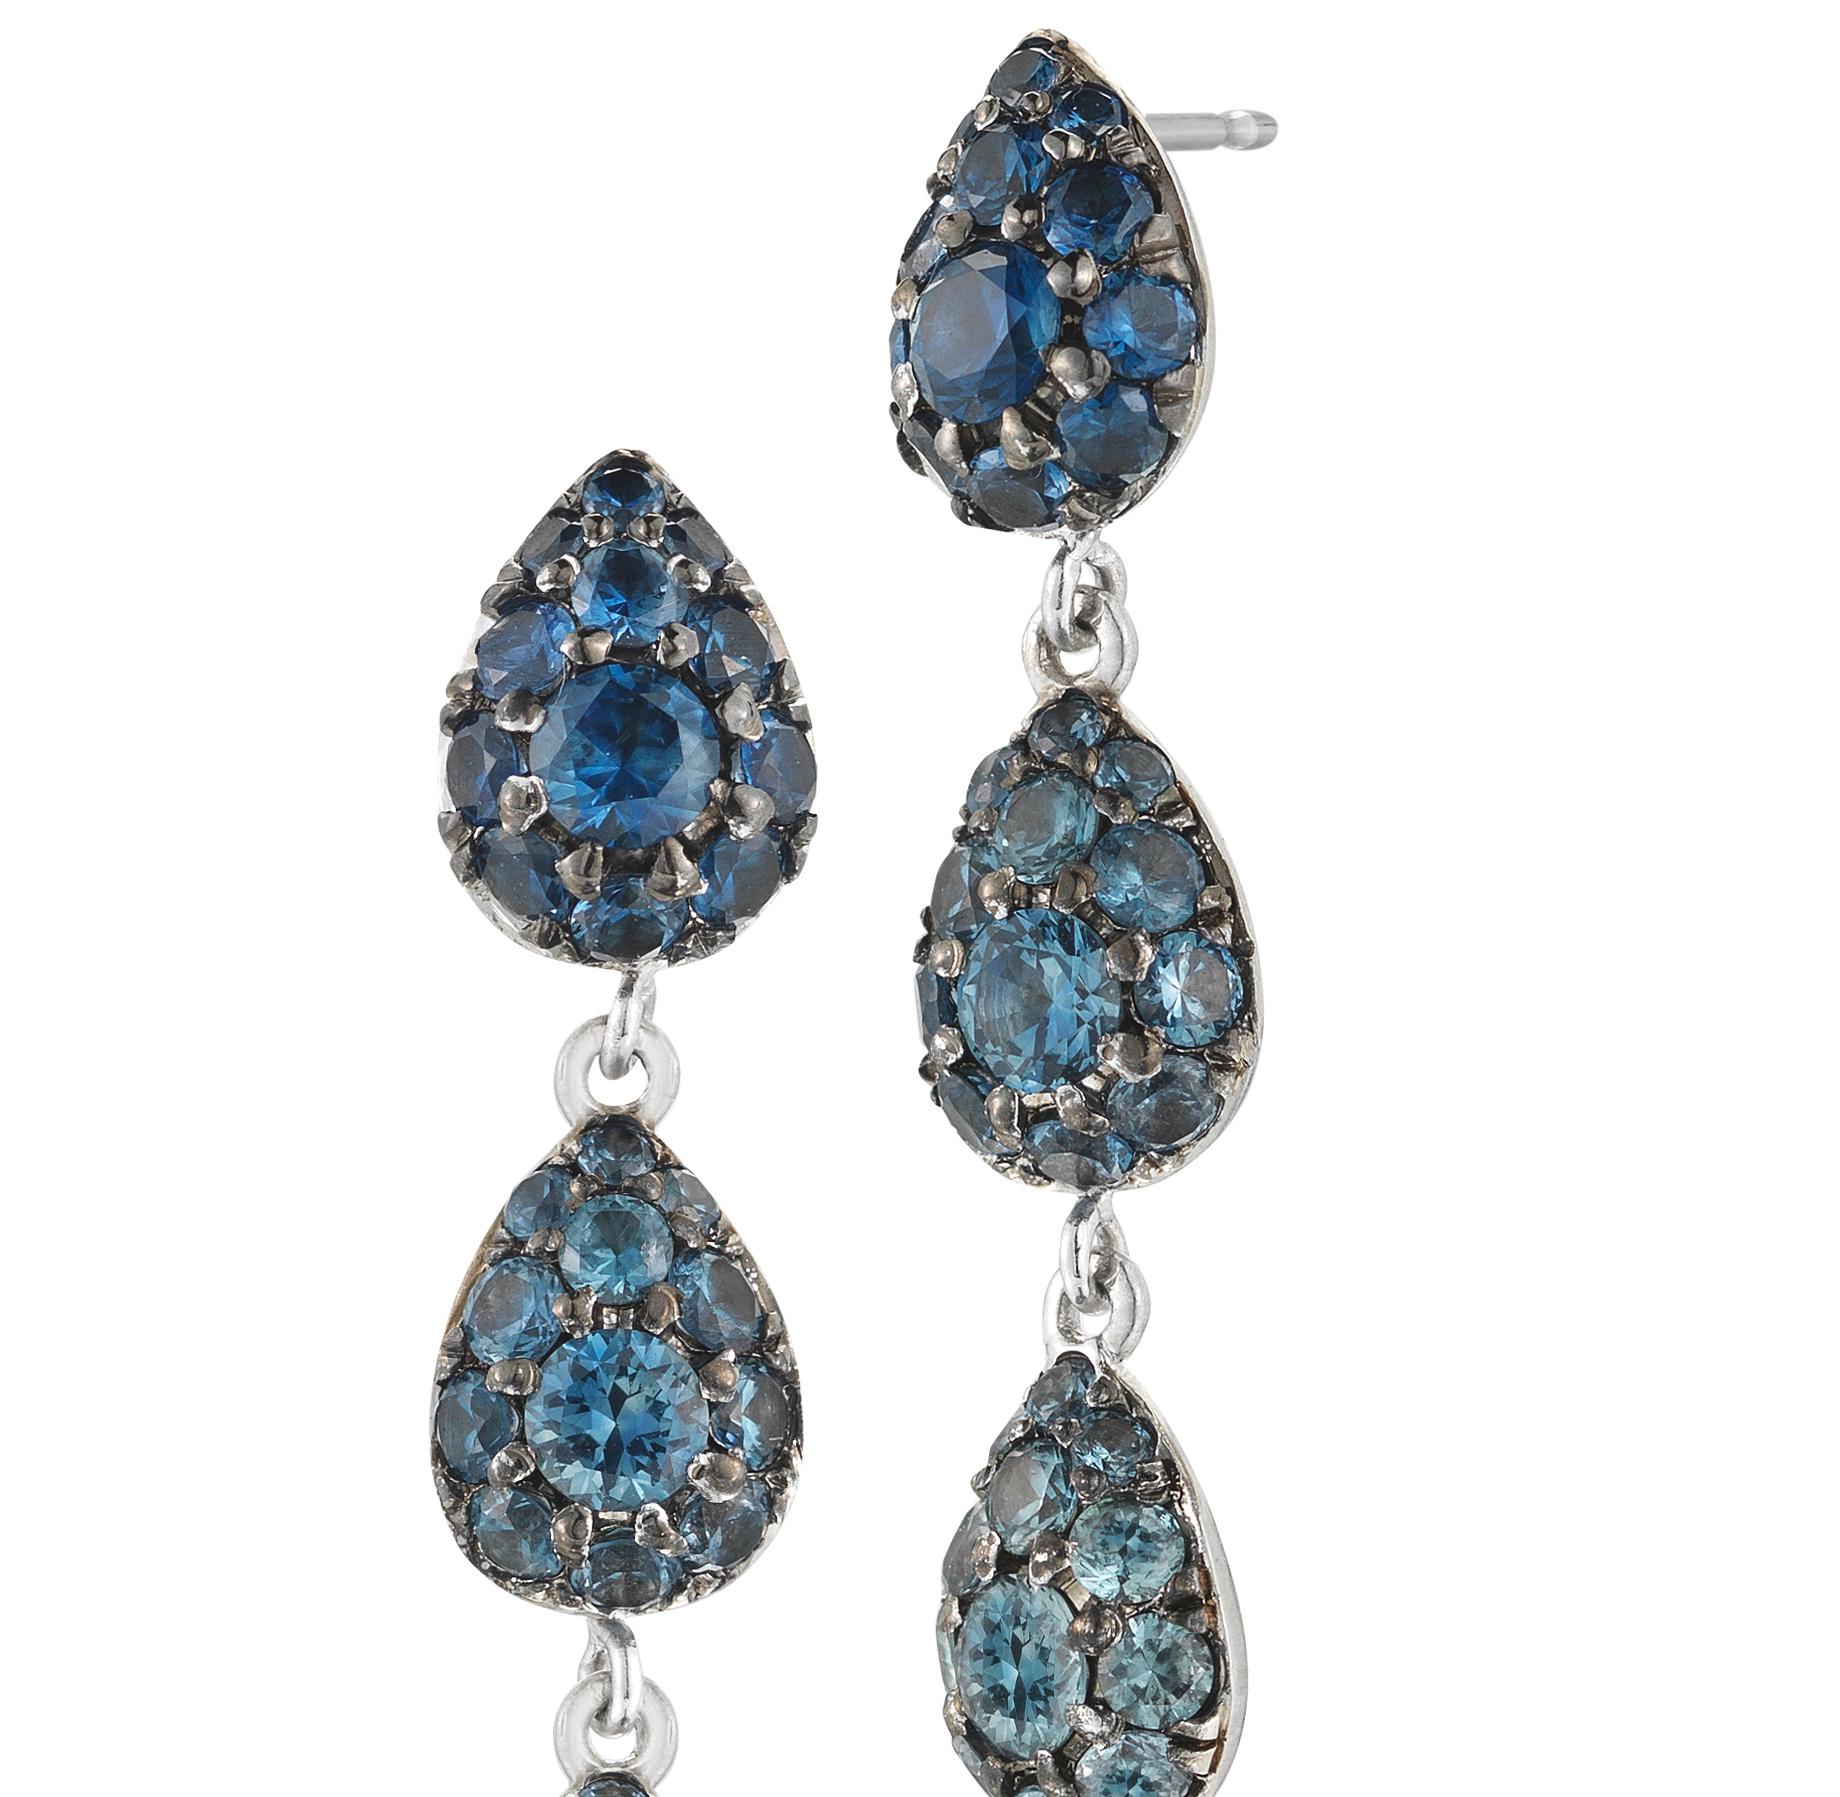 White gold drop earrings are set with gradient blue sapphires. Hand painted with grey rhodium around stones. 

18k white gold 
1.47cts of blue sapphires
complimentary domestic ground 